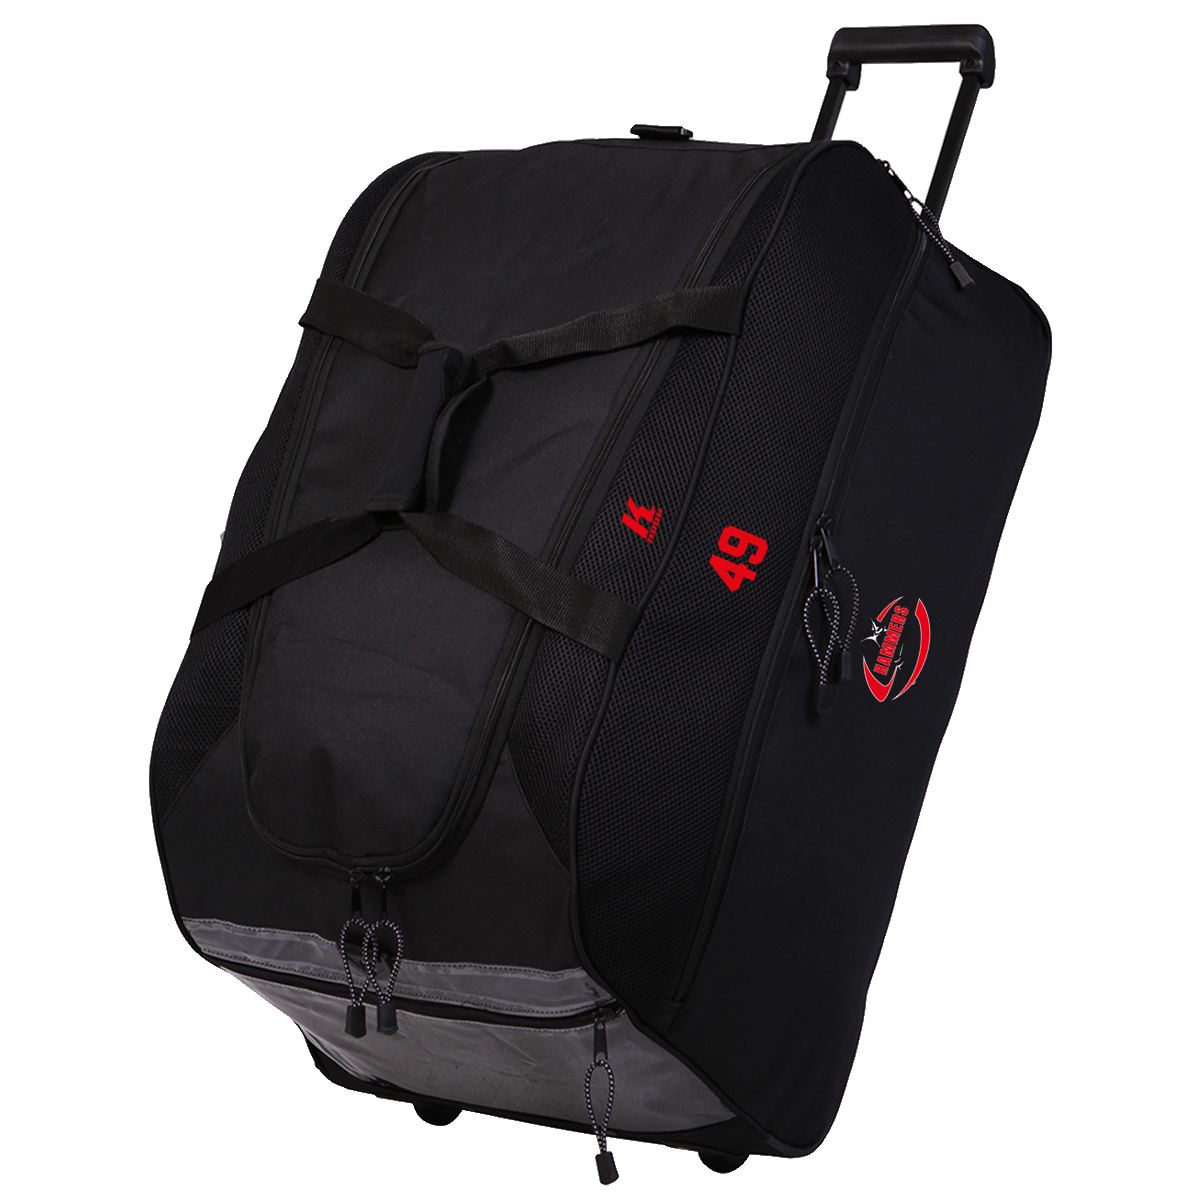 S-Hammers Wheelie Team Kitbag with Playernumber or Initials